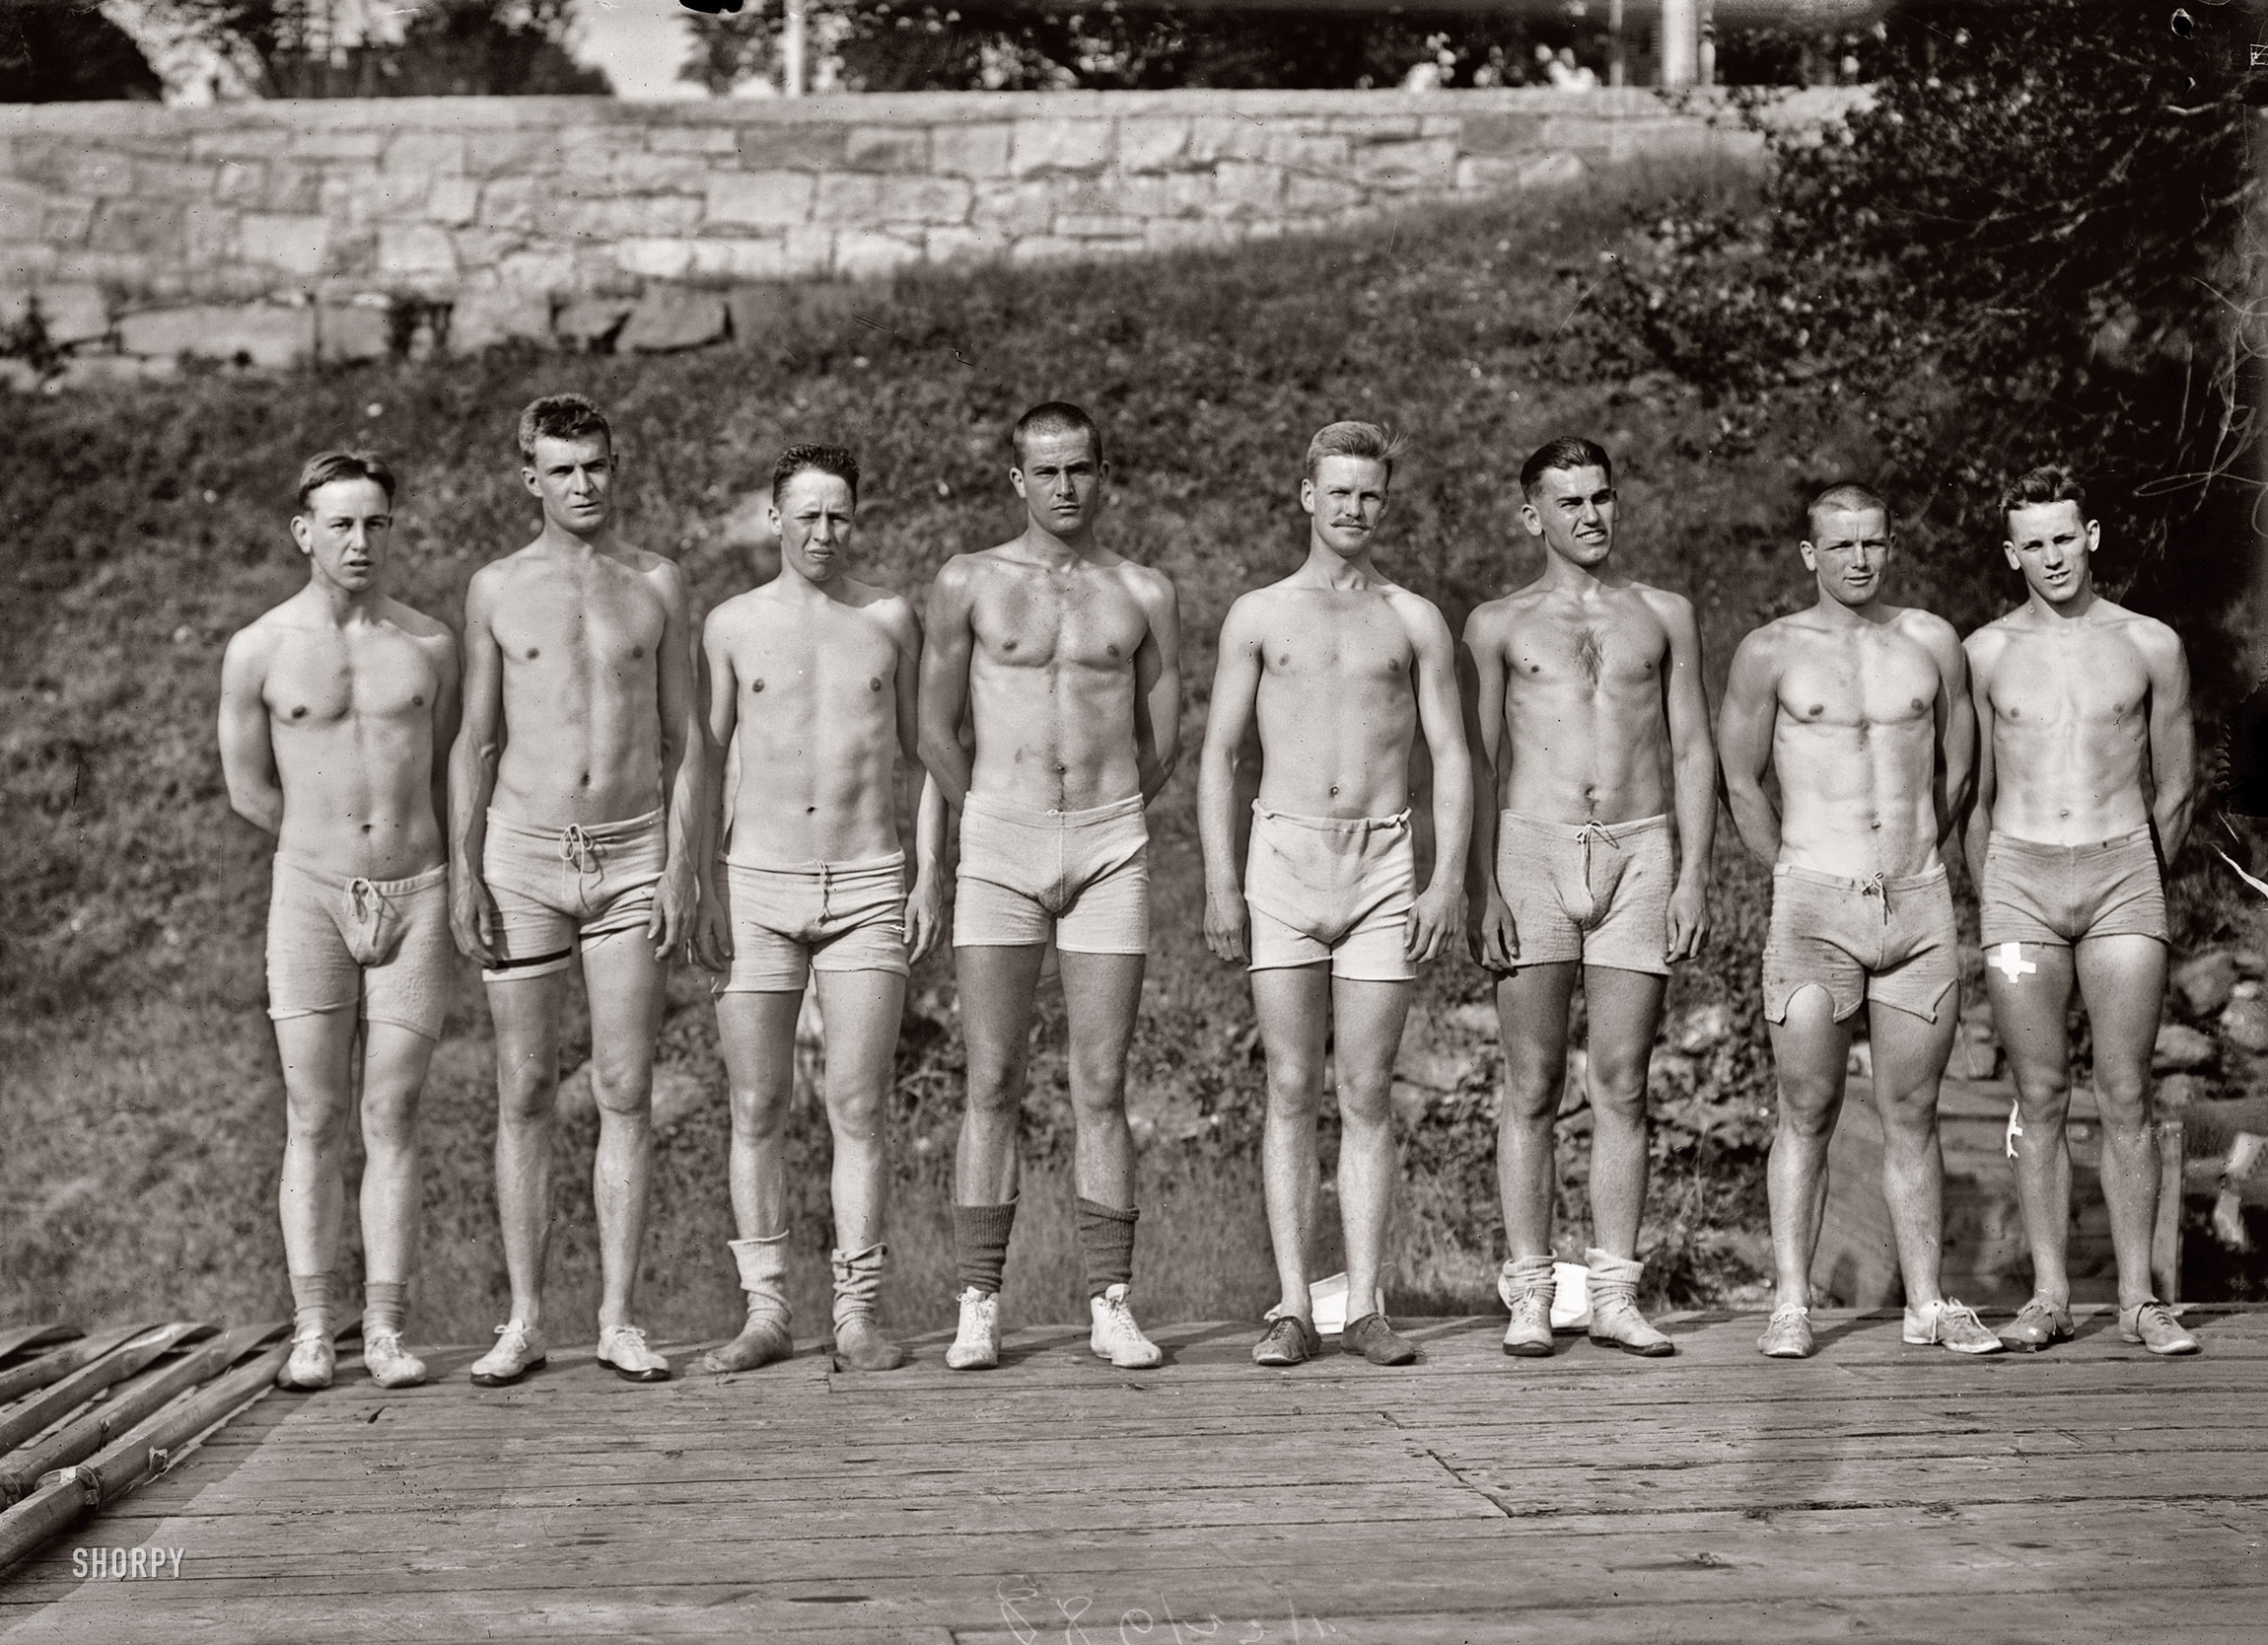 &nbsp; &nbsp; &nbsp; &nbsp; Click here for more vintage rowers.
June 22, 1911. "Yale rowing team." 5x7 inch glass negative, Bain News Service. View full size.